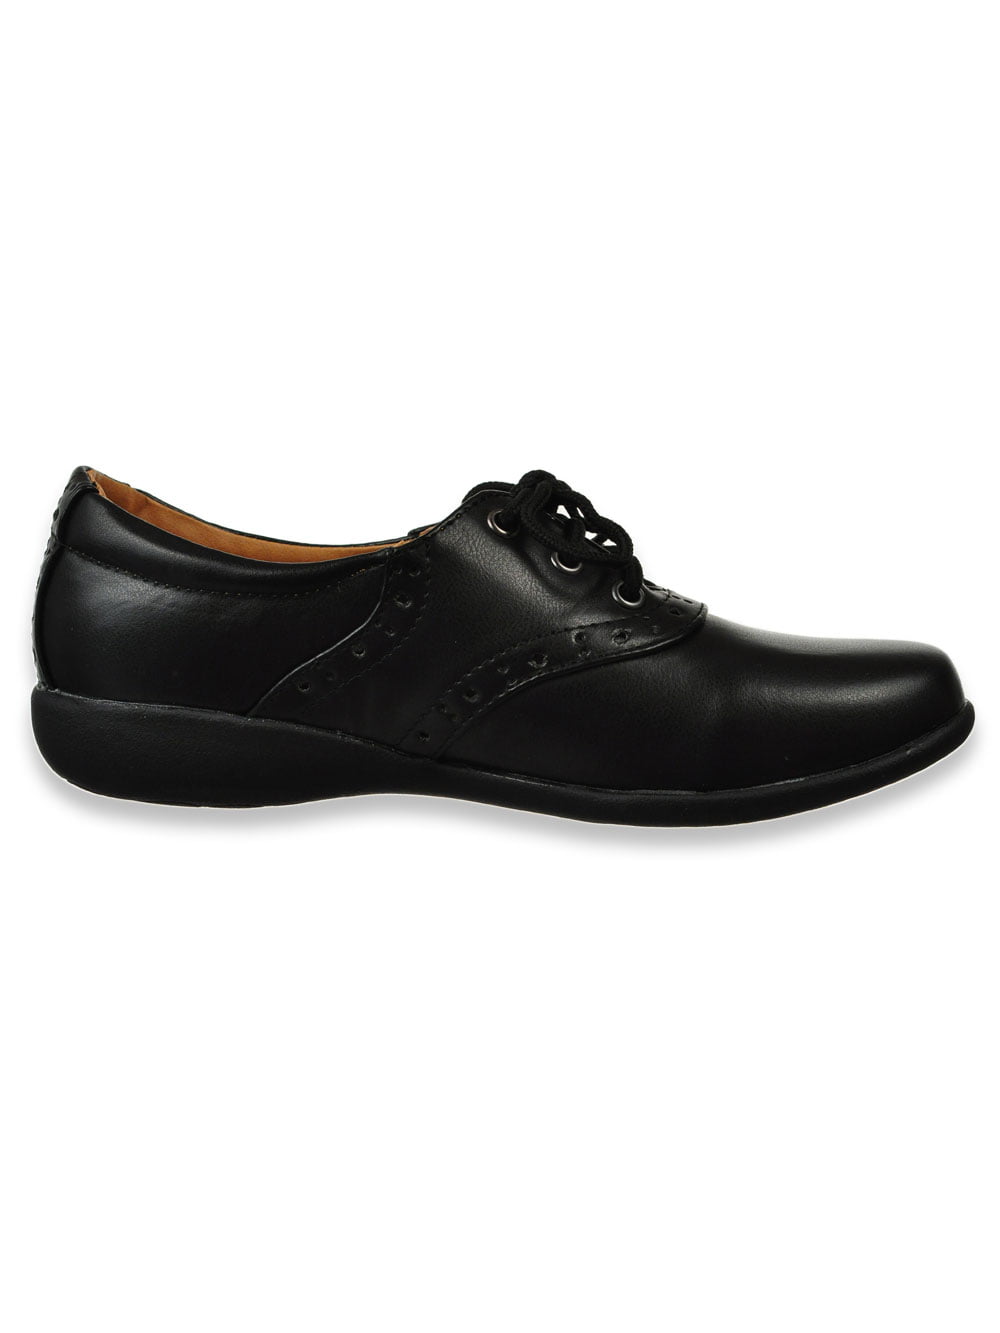 School Rider Girls Lace-Up School Shoes 